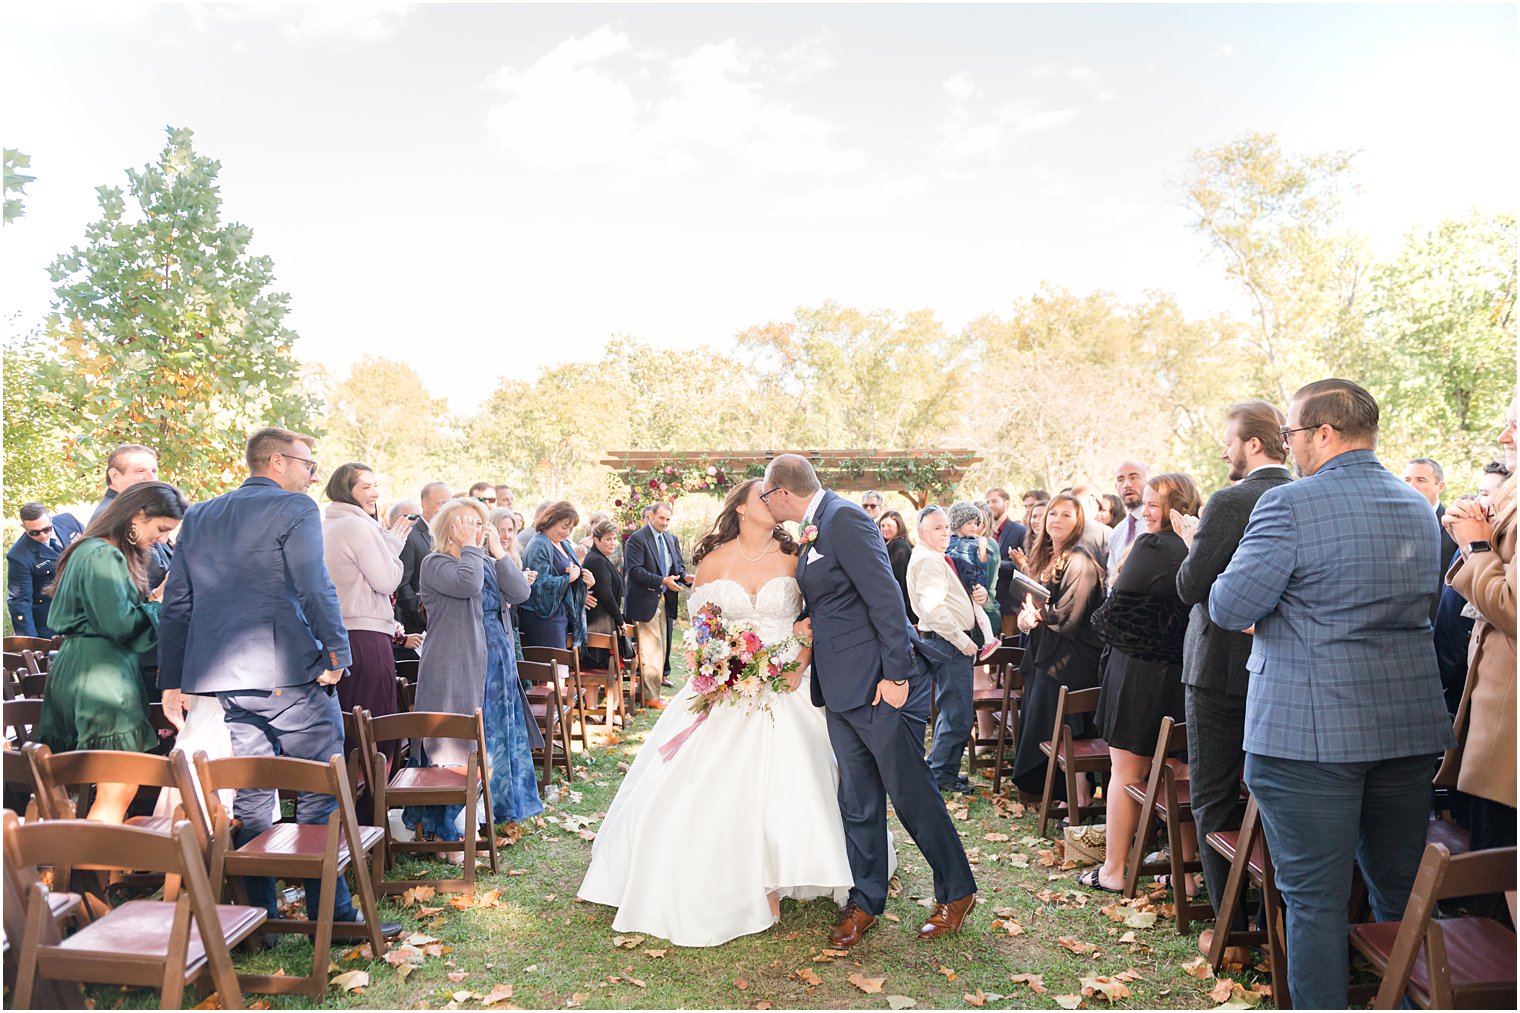 newlyweds kiss in the aisle after fall wedding ceremony outdoors on lawn at Bishop Hall Farmstead